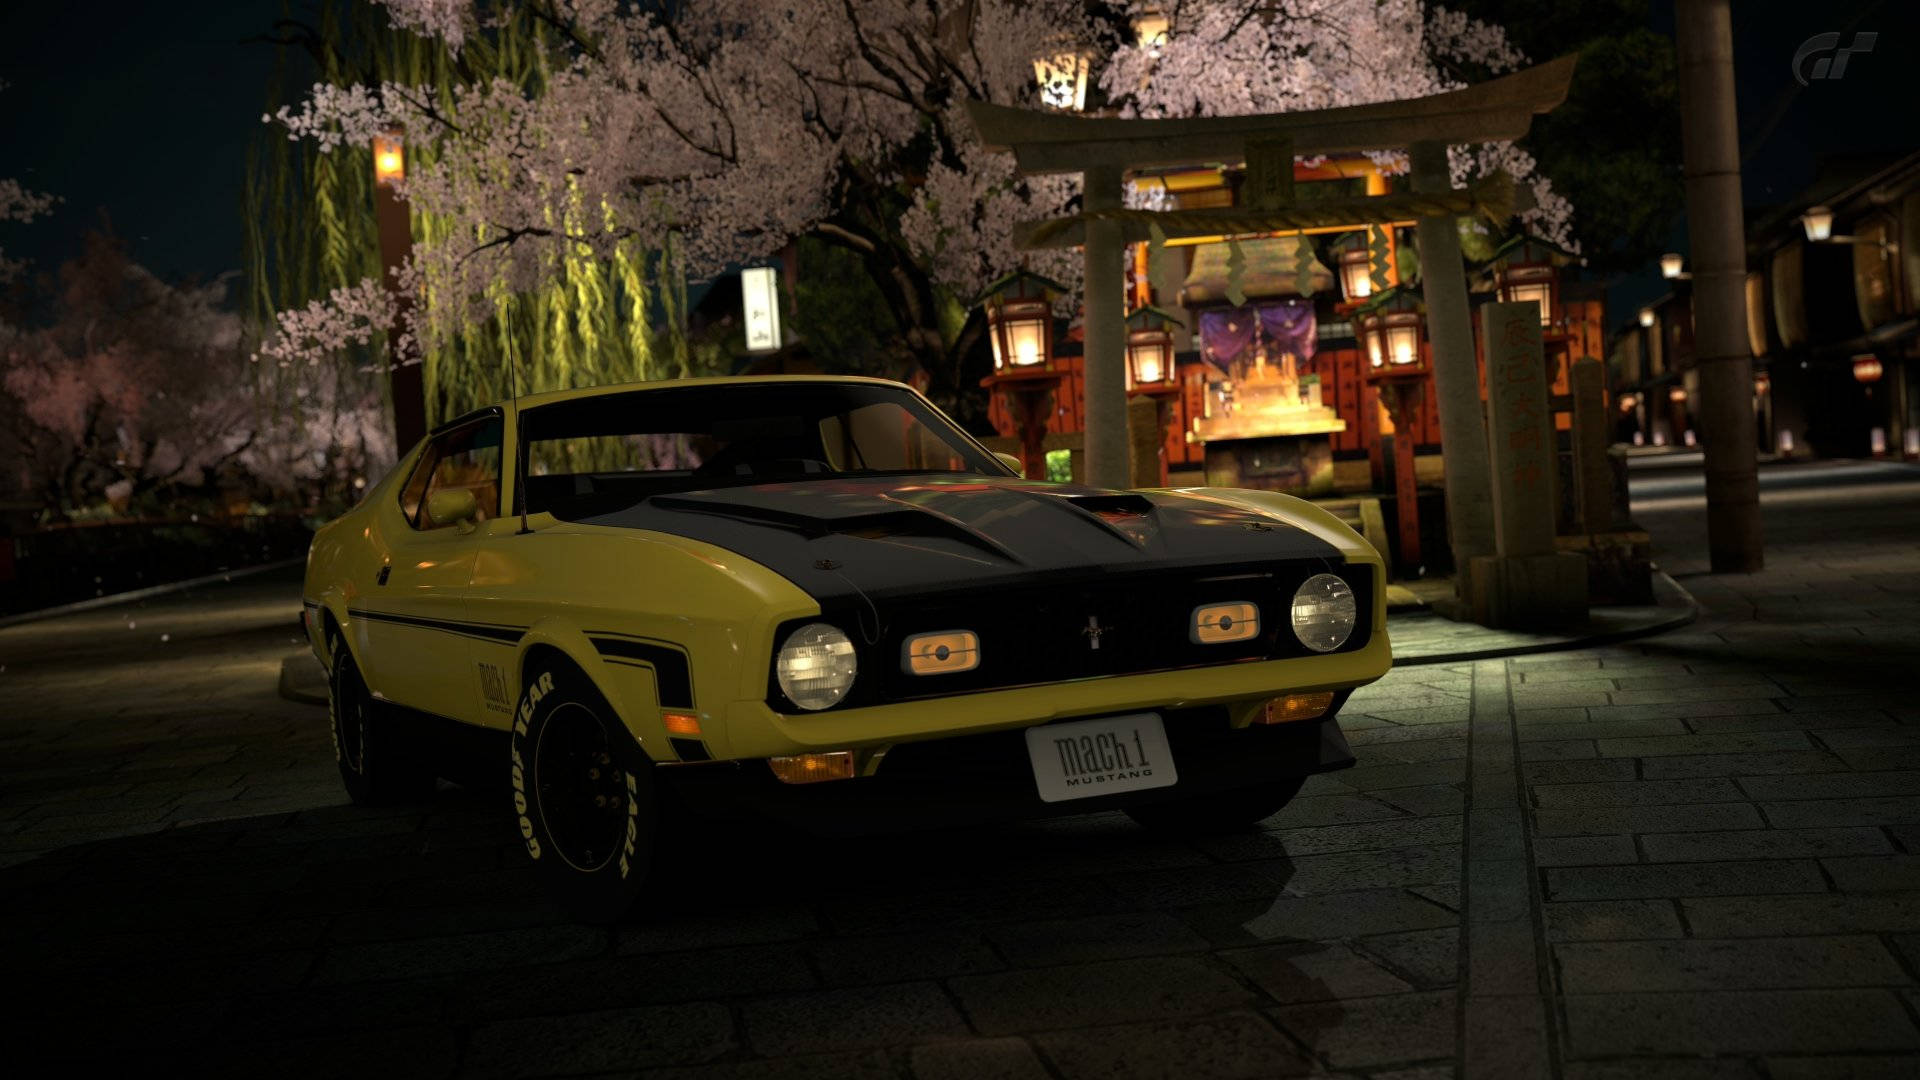 Hd Car In Cherry Blossom Temple Background